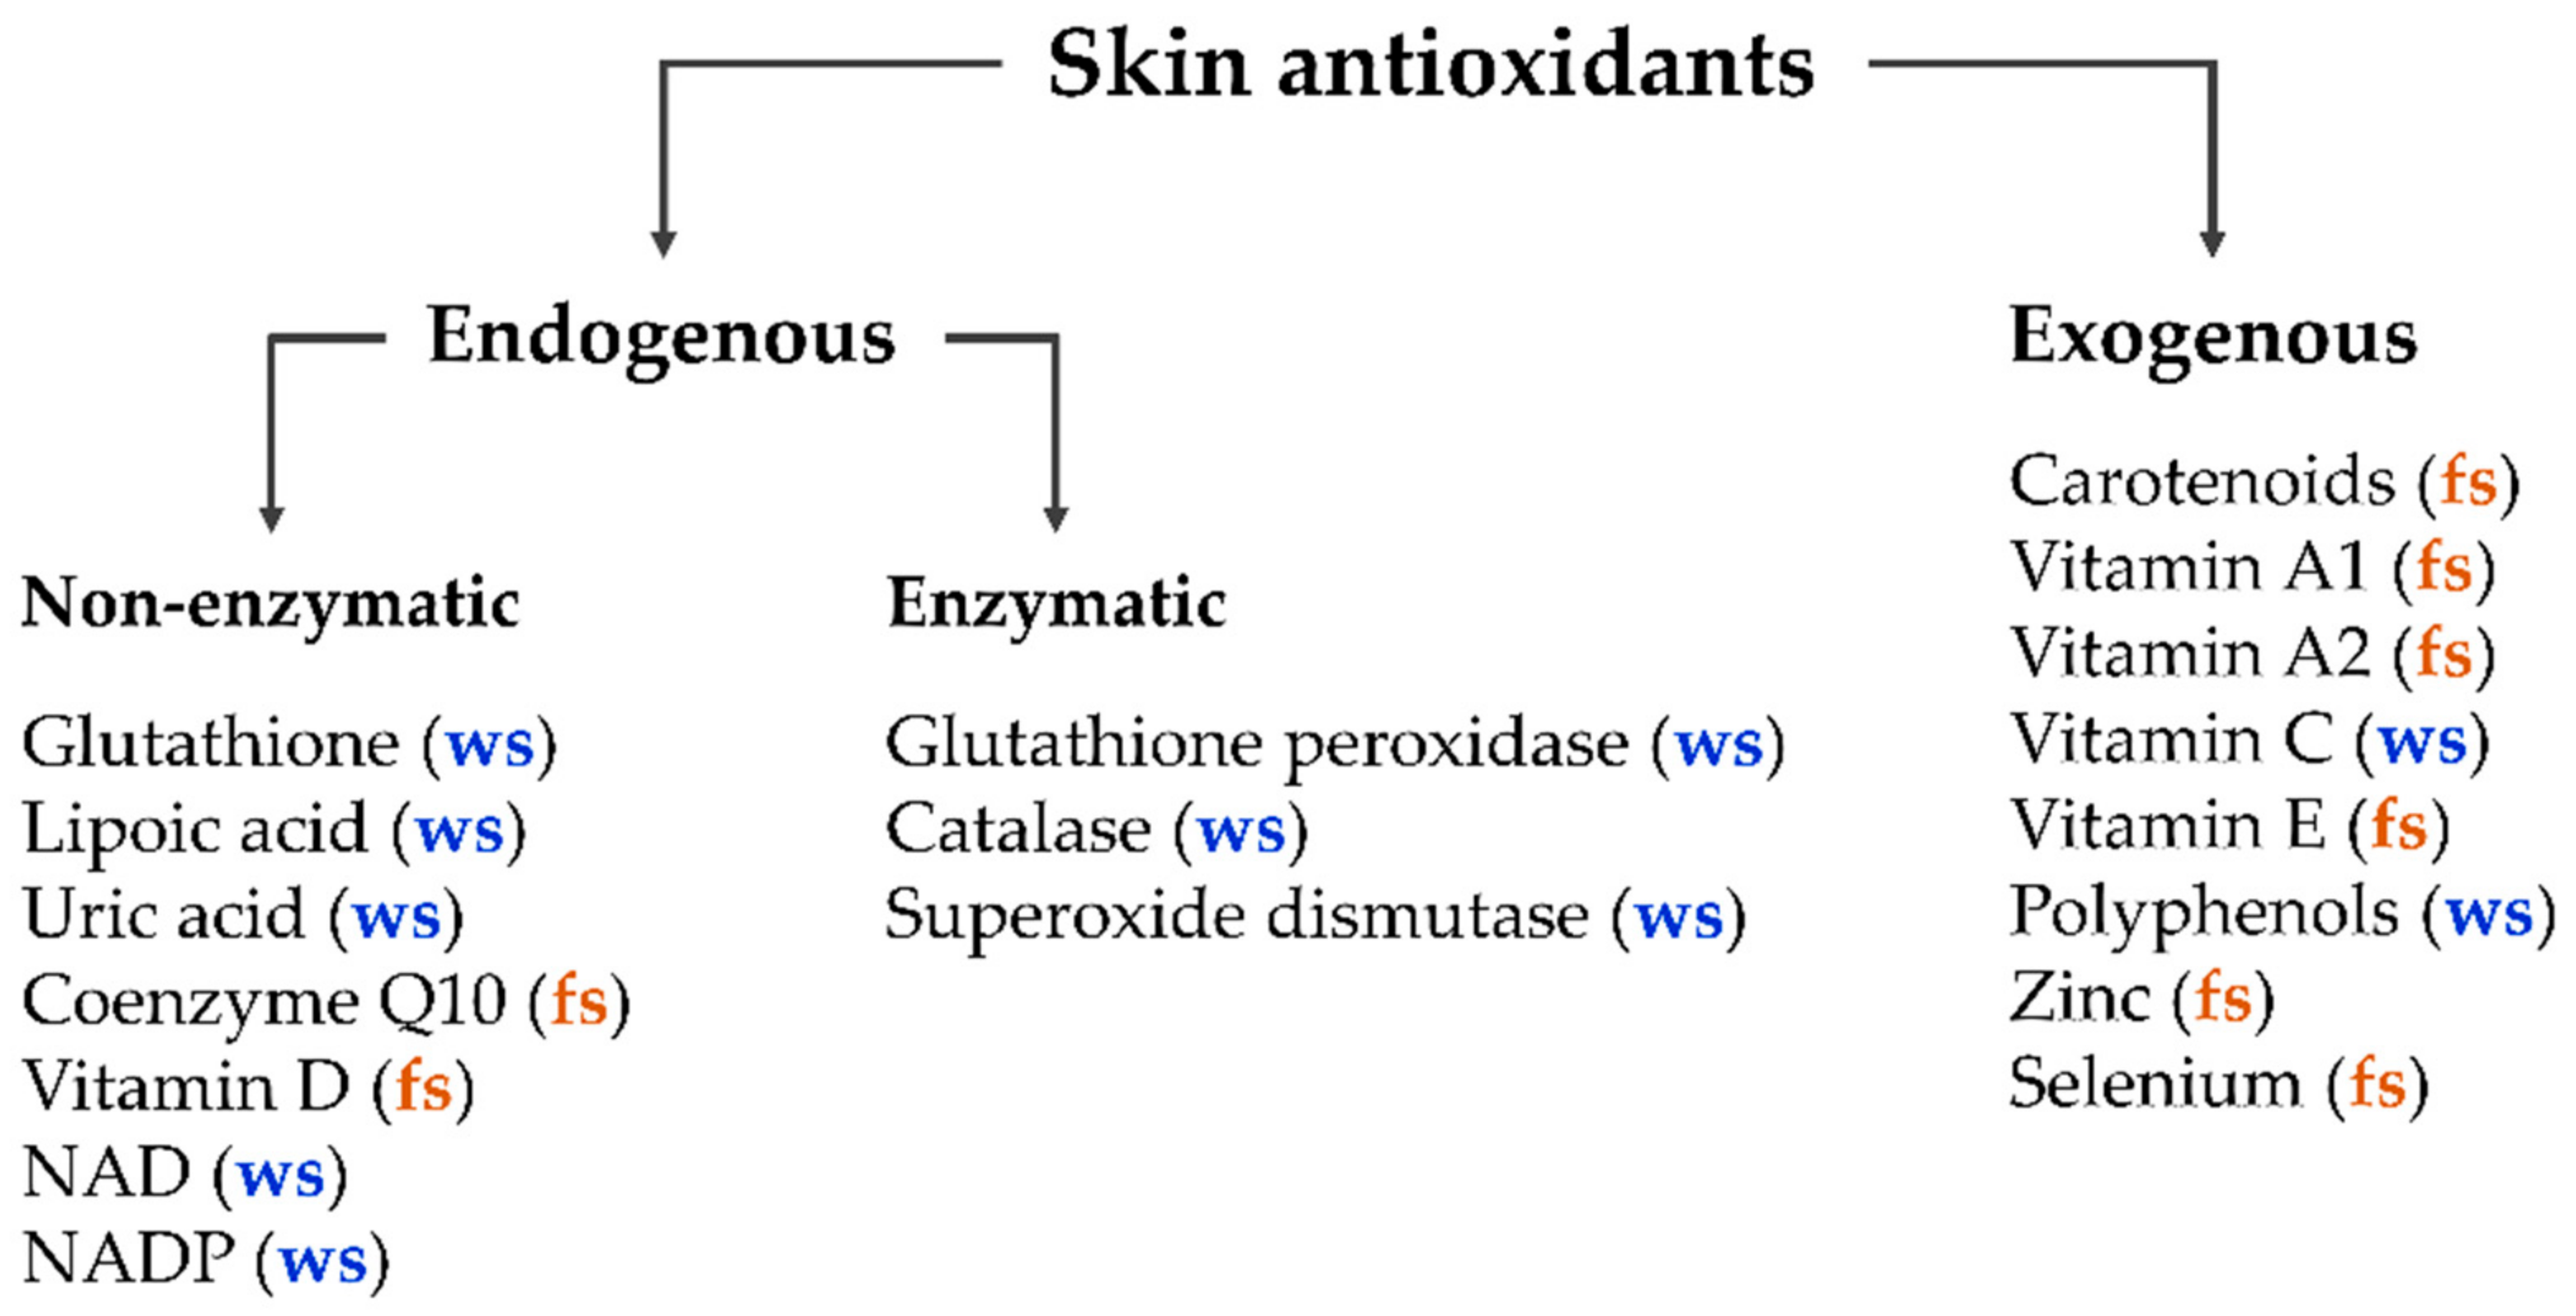 Antioxidants | Free Full-Text | Carotenoids in Human Skin In Vivo:  Antioxidant and Photo-Protectant Role against External and Internal  Stressors